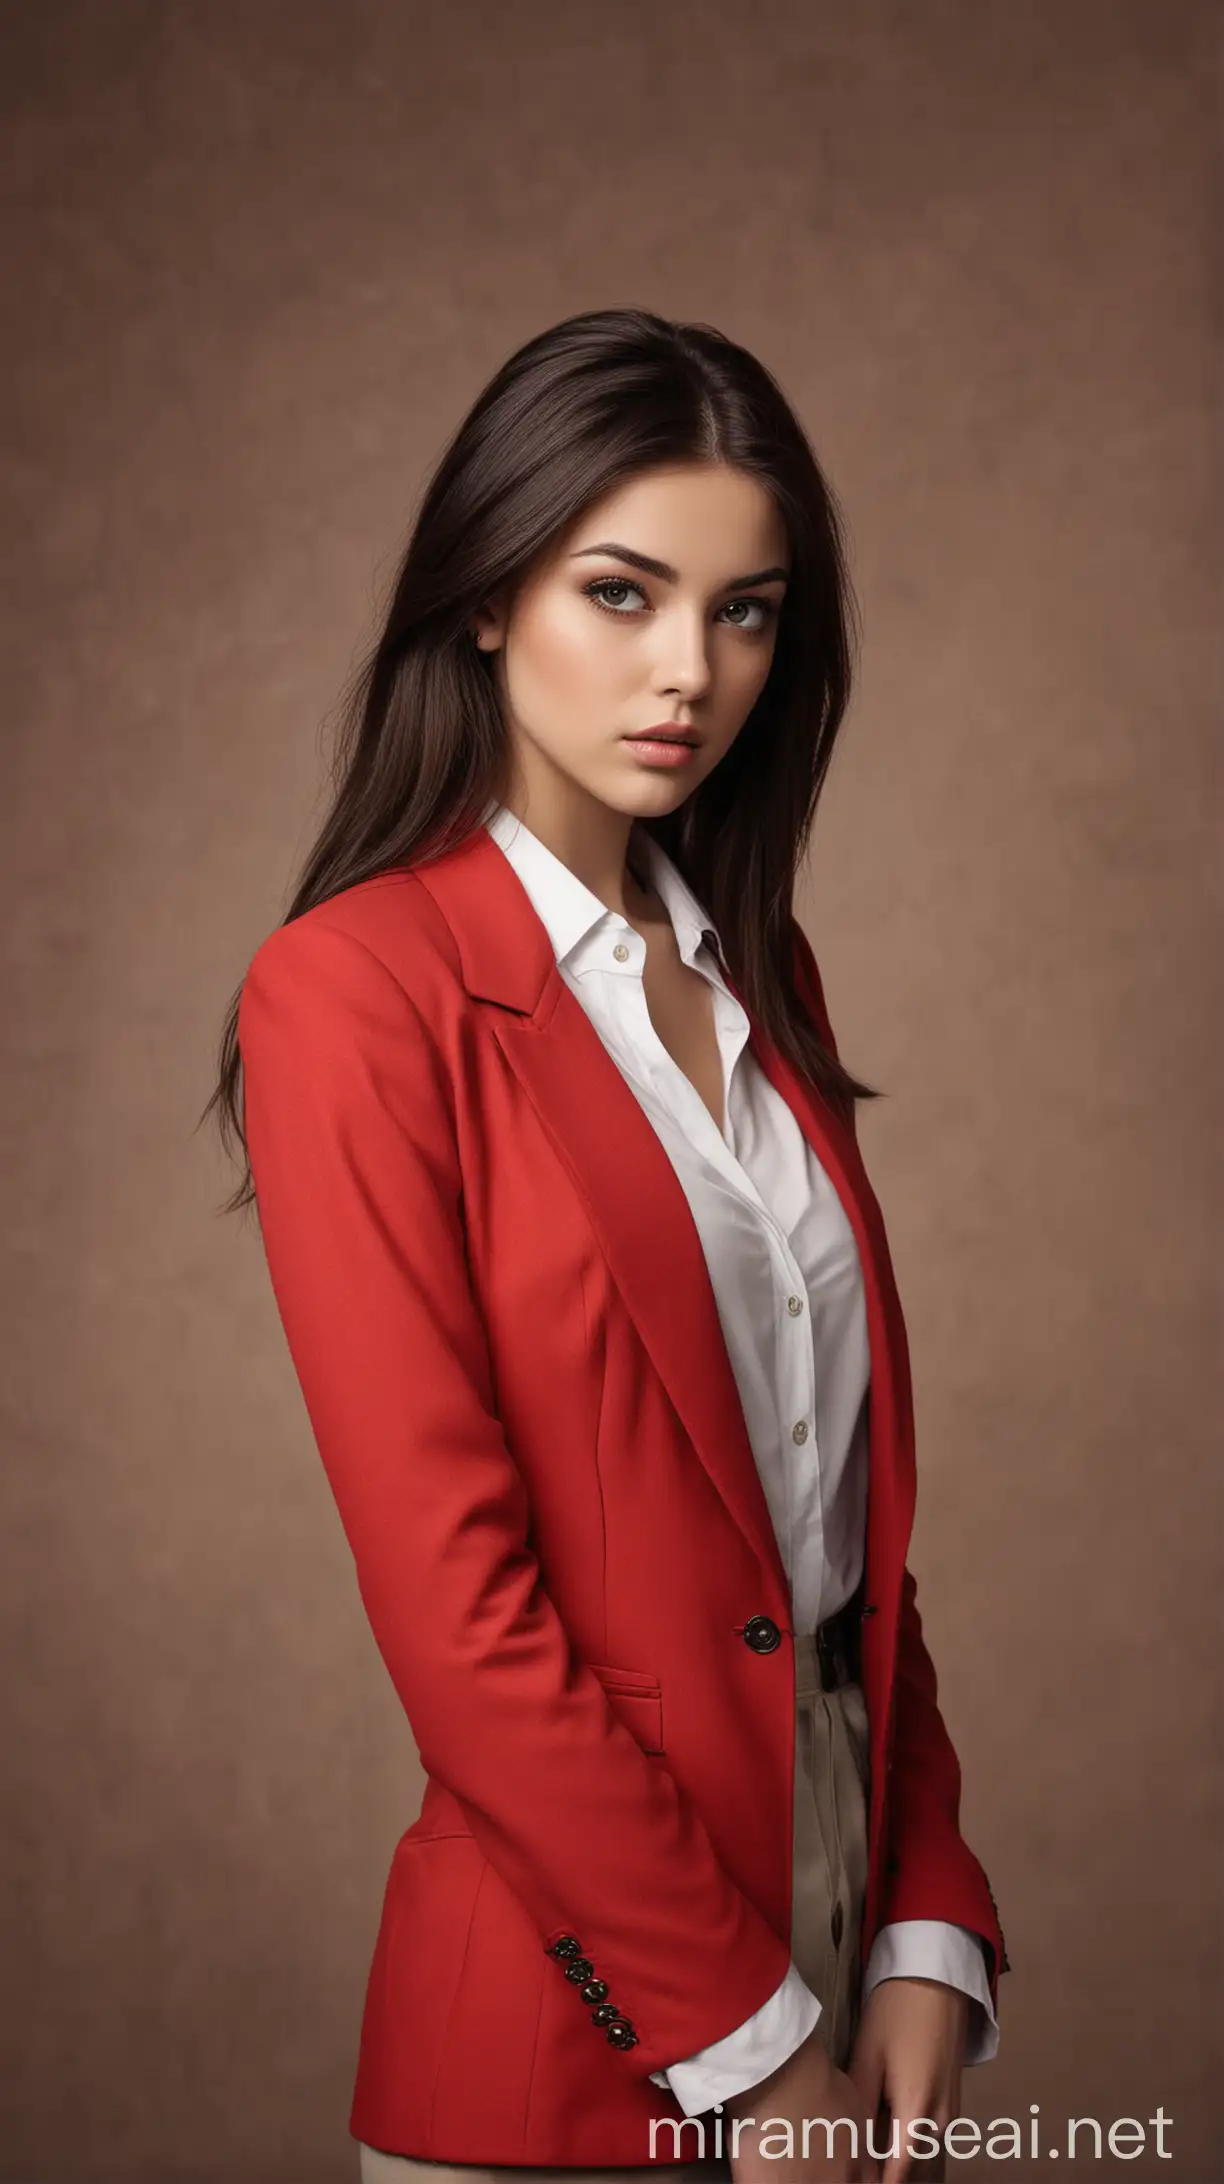 High Fashion Portrait of Proud Young Woman in Red Blazer